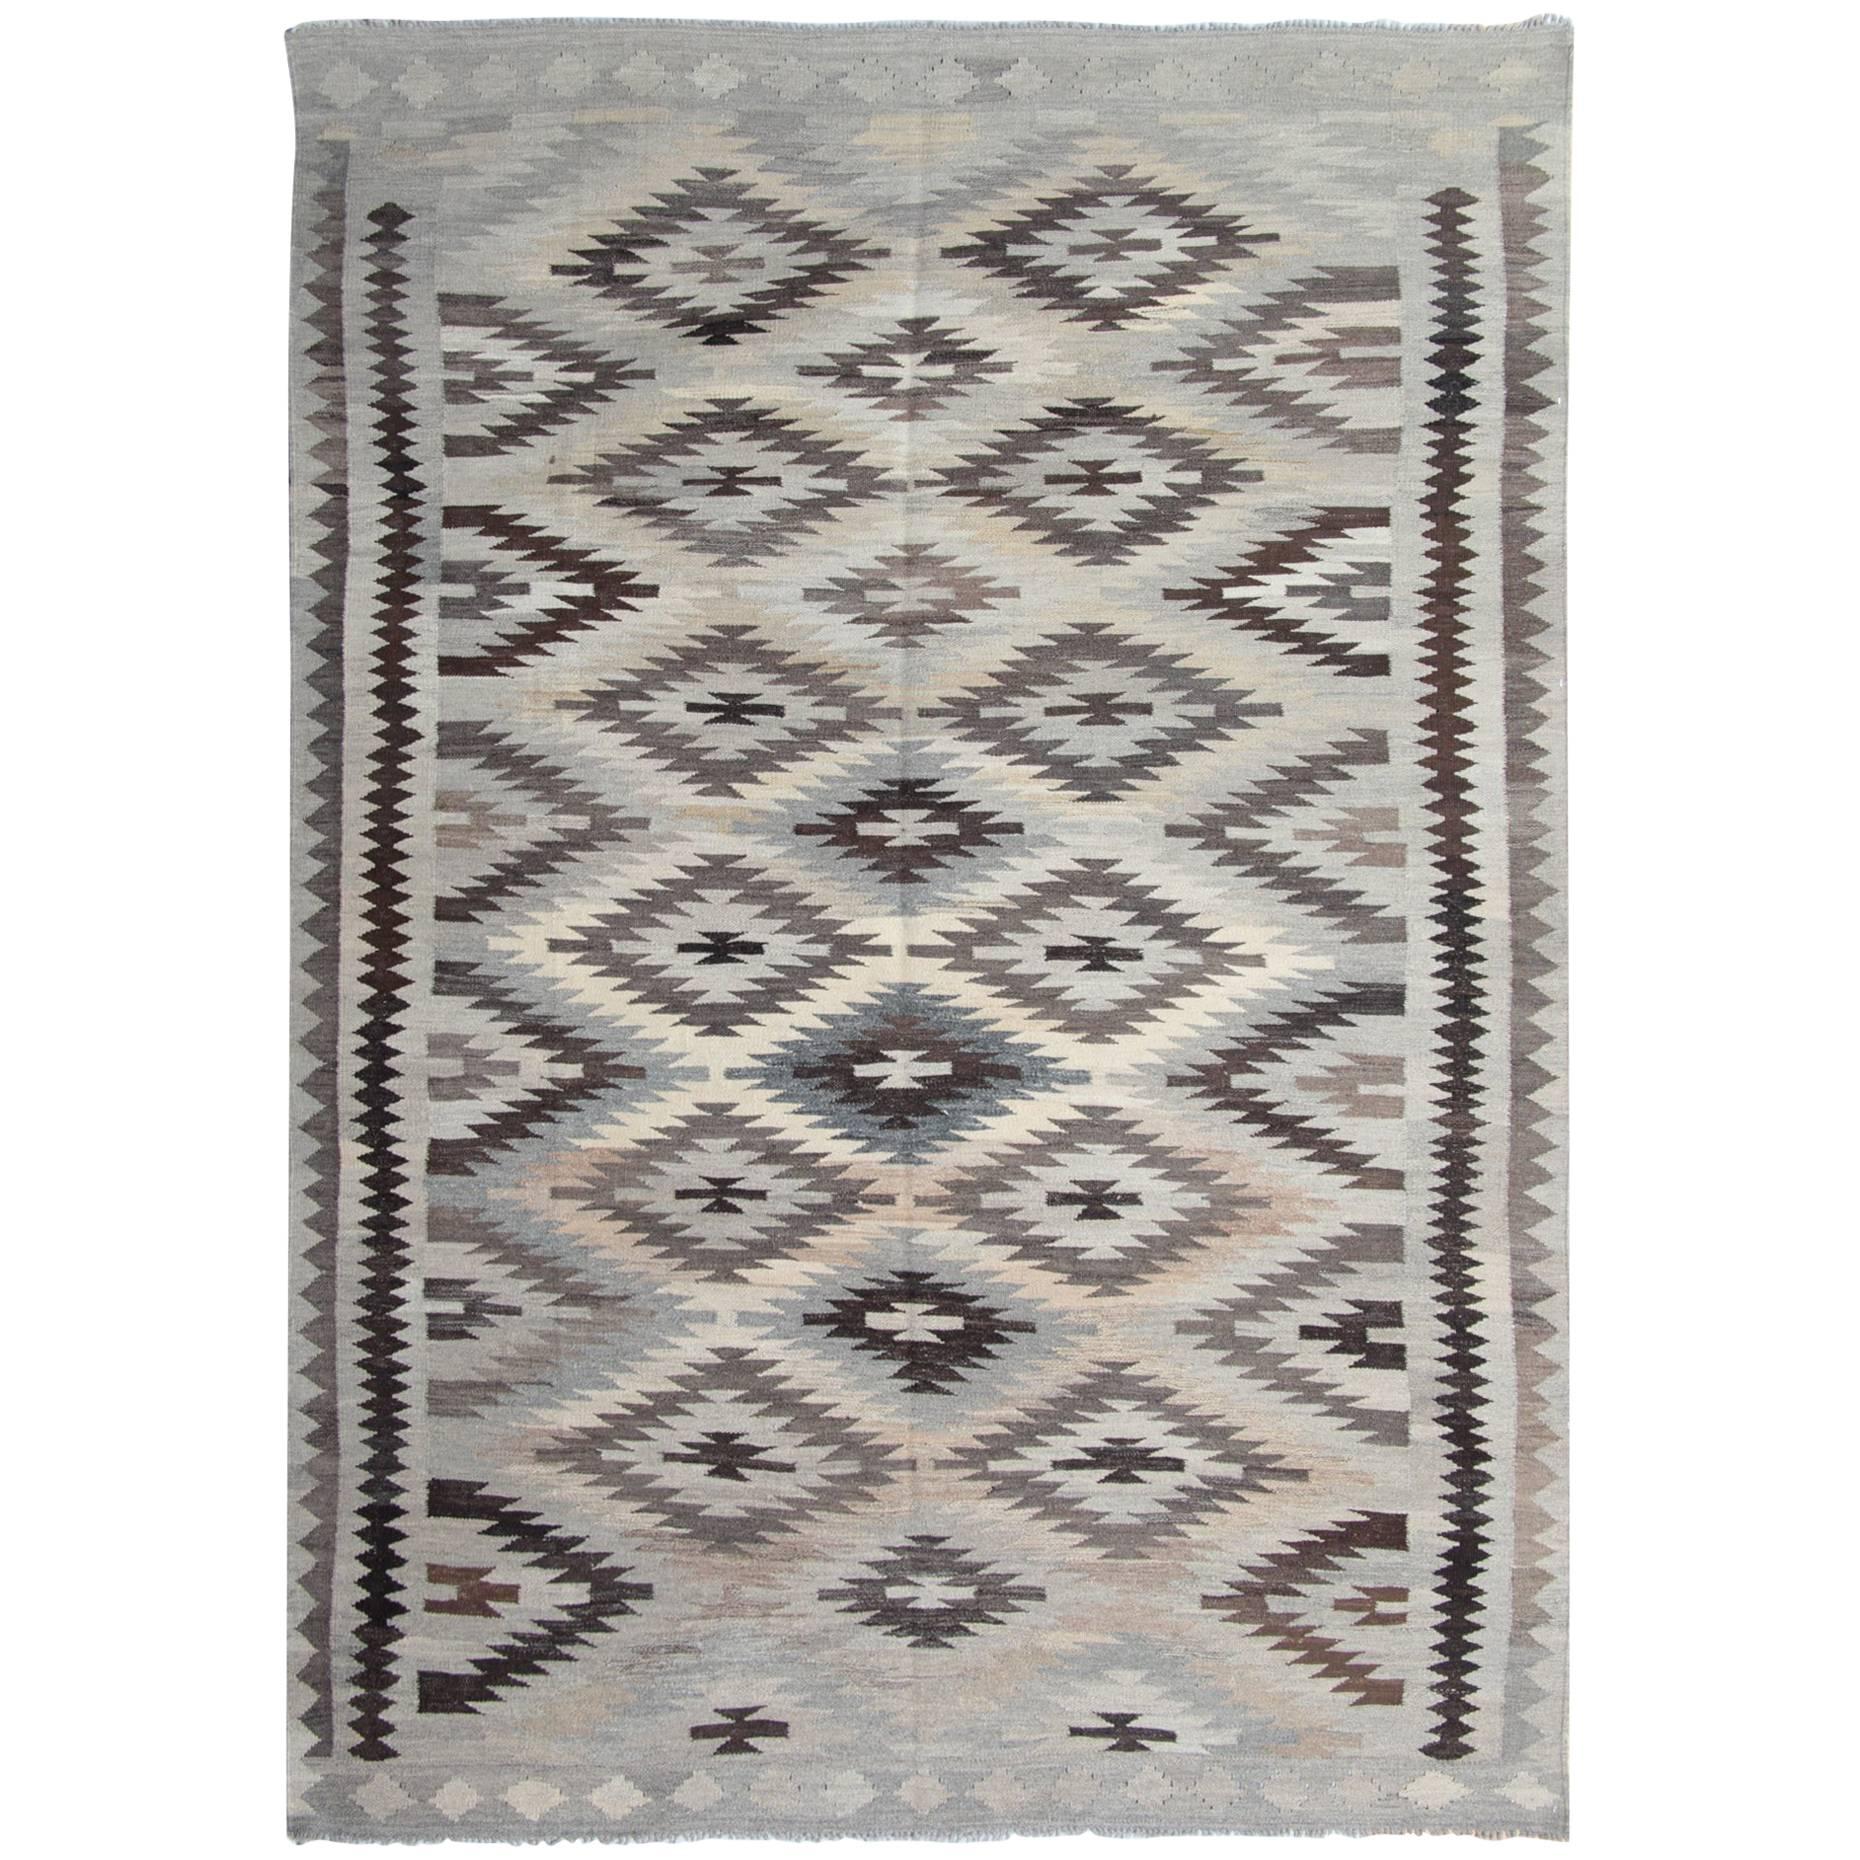 New Kilim Rugs, Traditional Rugs, Carpet from Afghanistan